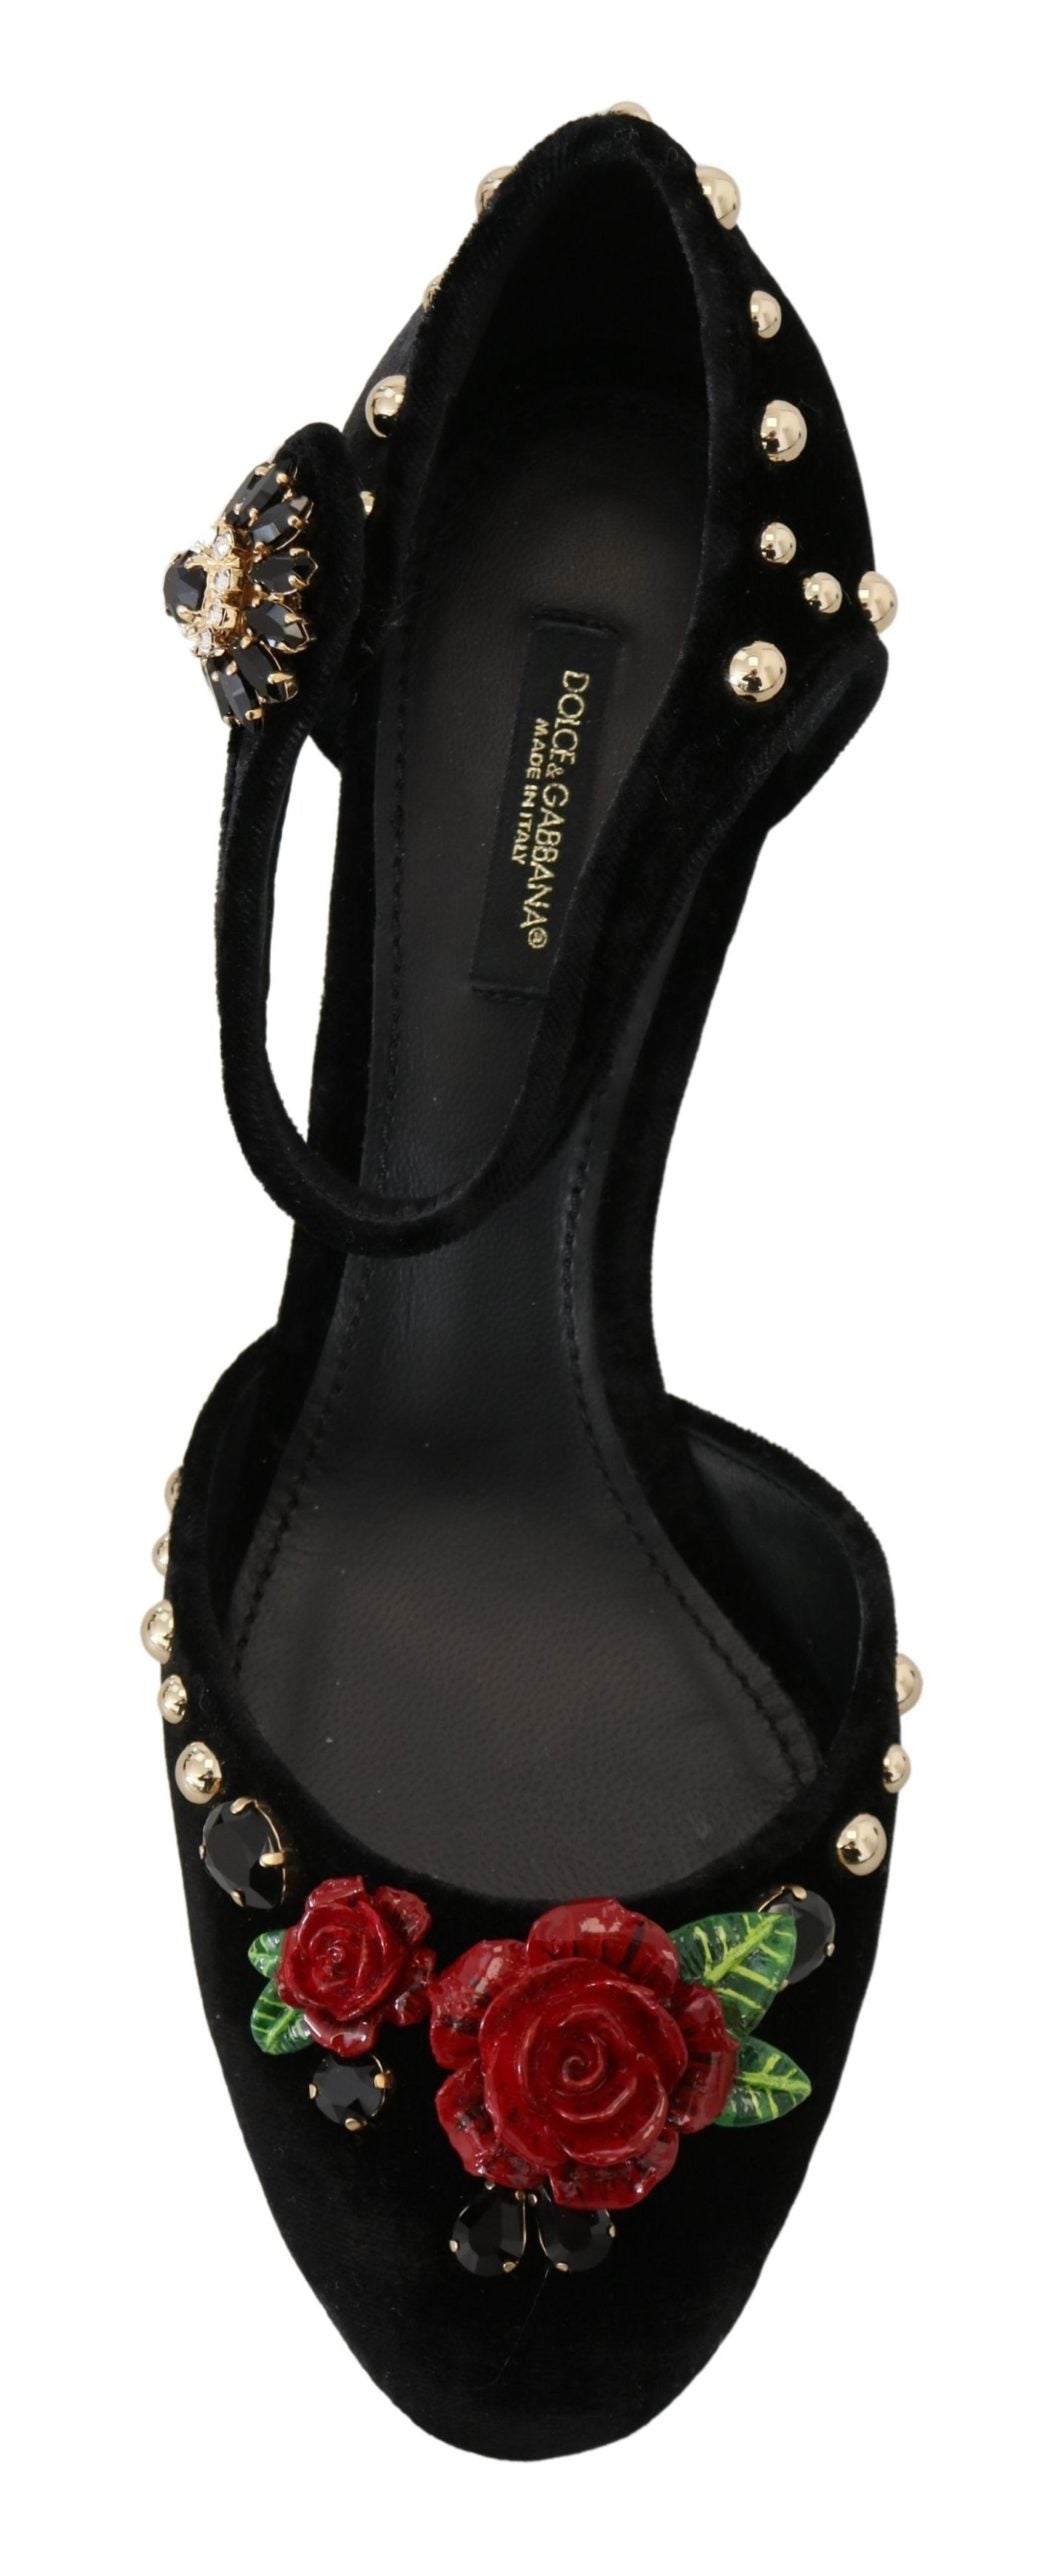 Dolce & Gabbana Black Pearl Crystal Vally Heels Sandals Shoes